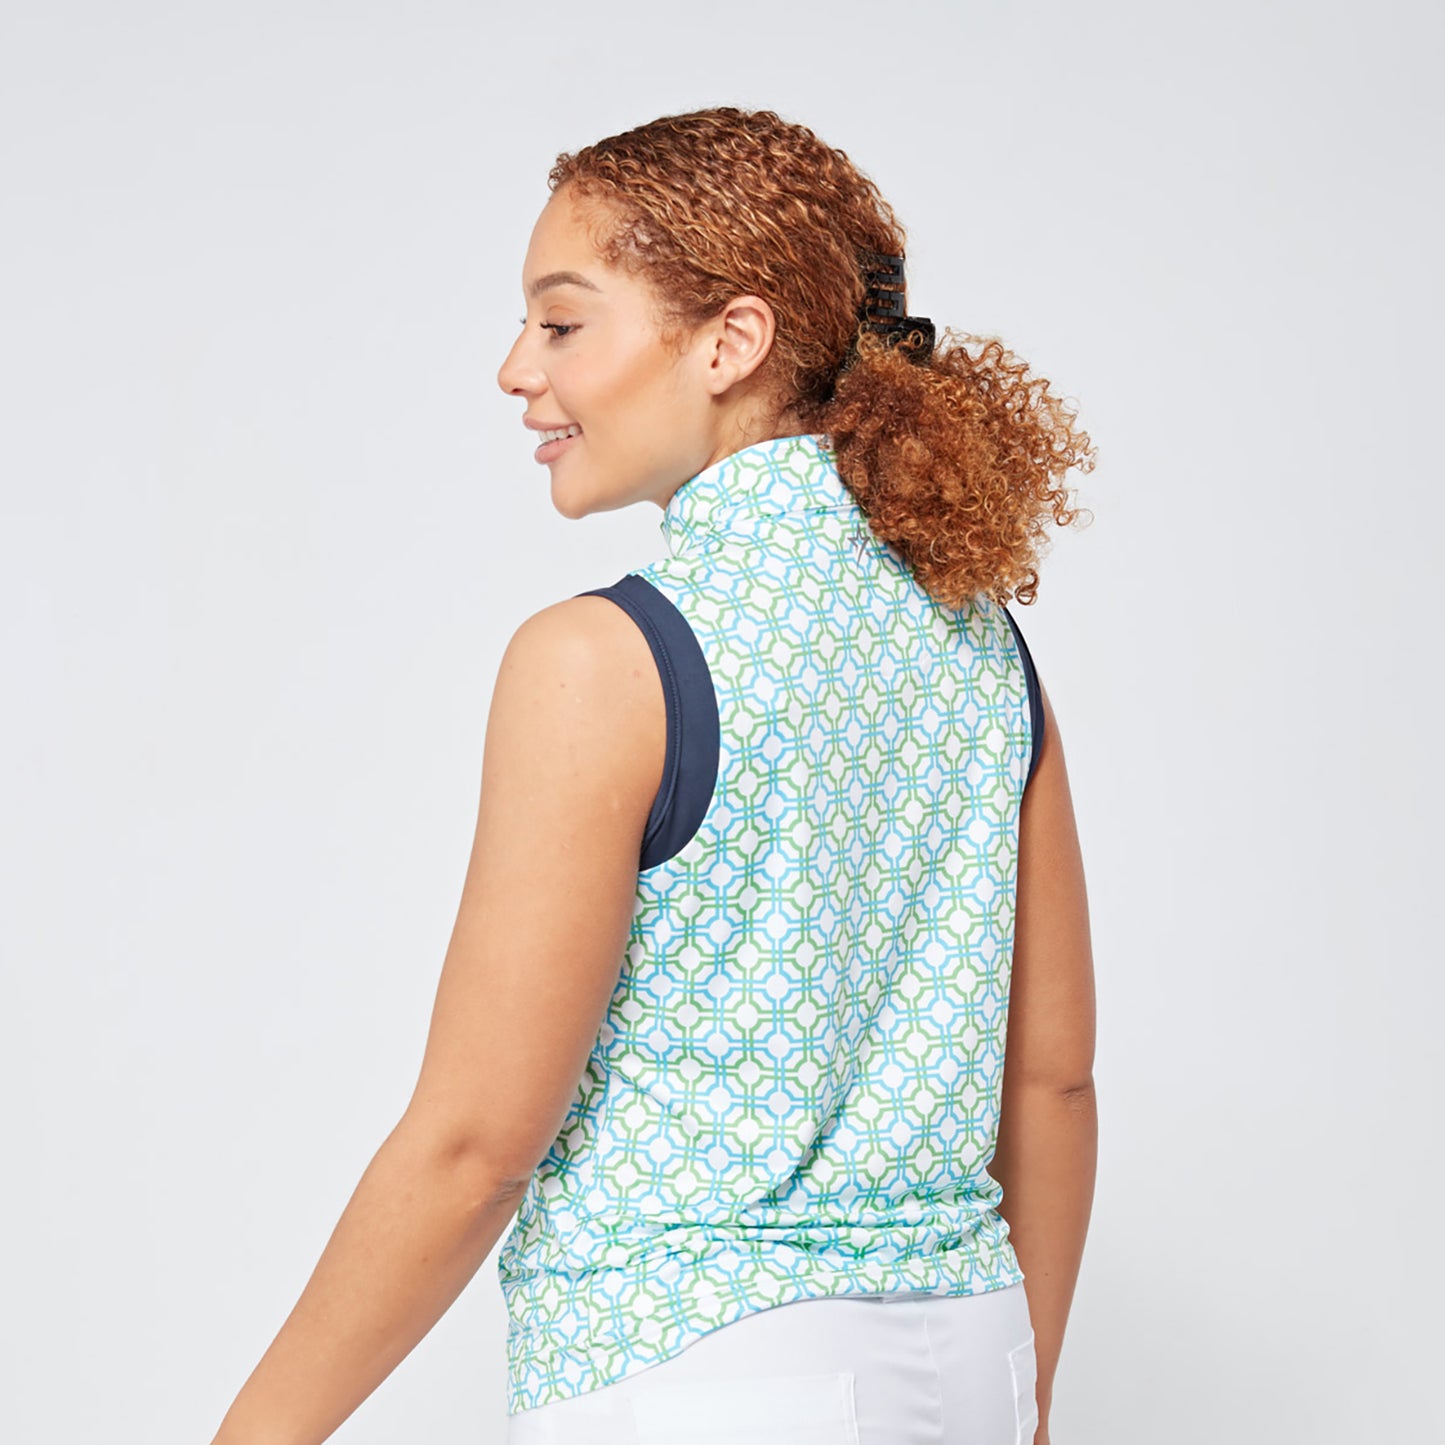 Swing Out Sister Ladies Sleeveless Zip-Neck Polo in Dazzling Blue and Emerald Mosaic Pattern